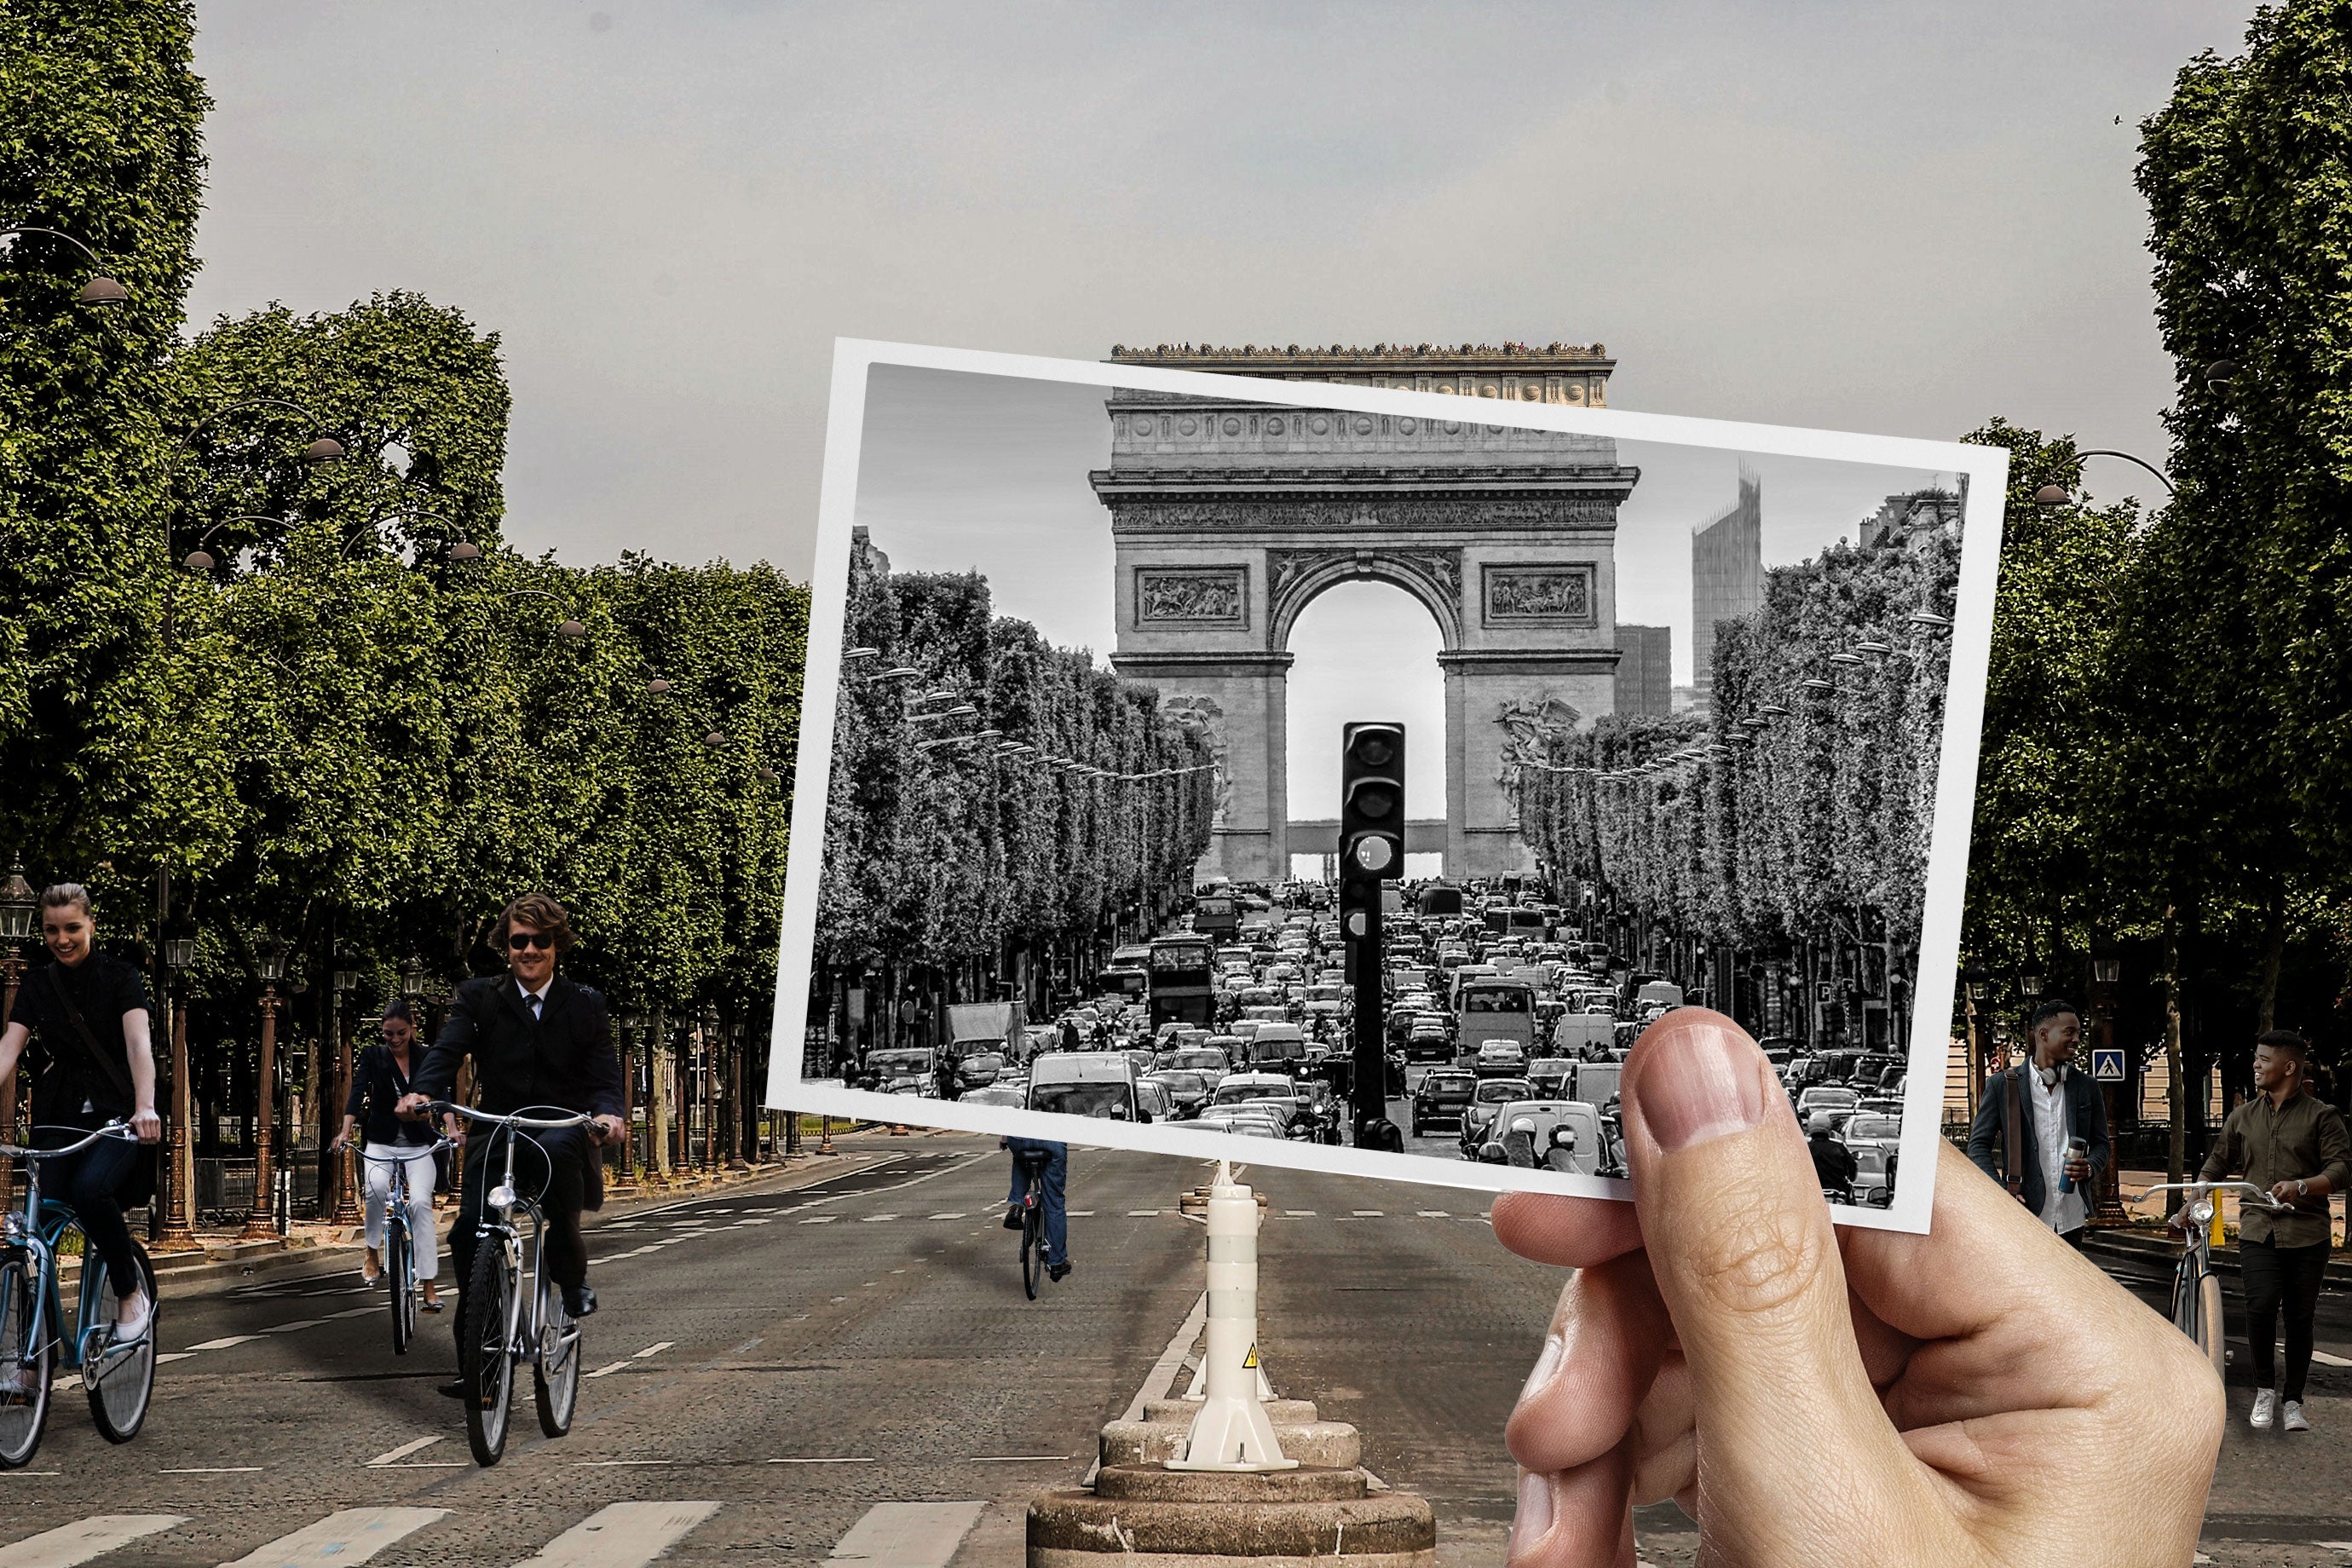 Paris Pulled Off the Dream of Many City Dwellers Around the World. It’s Been Thrilling—and Complicated. Henry Grabar